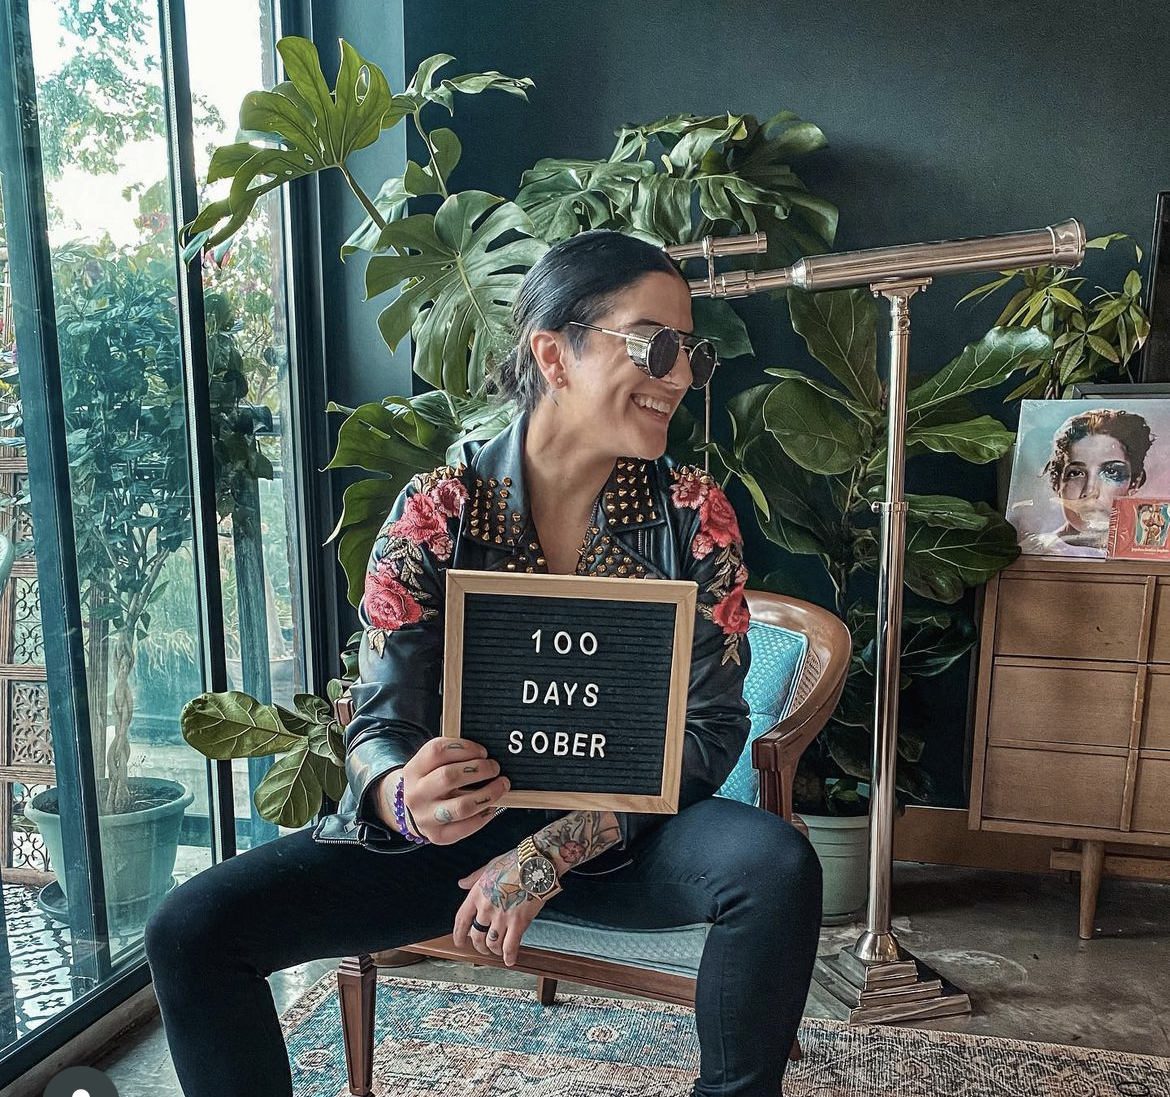 Julie sitting and holding an sign that says '100 Days Sober'